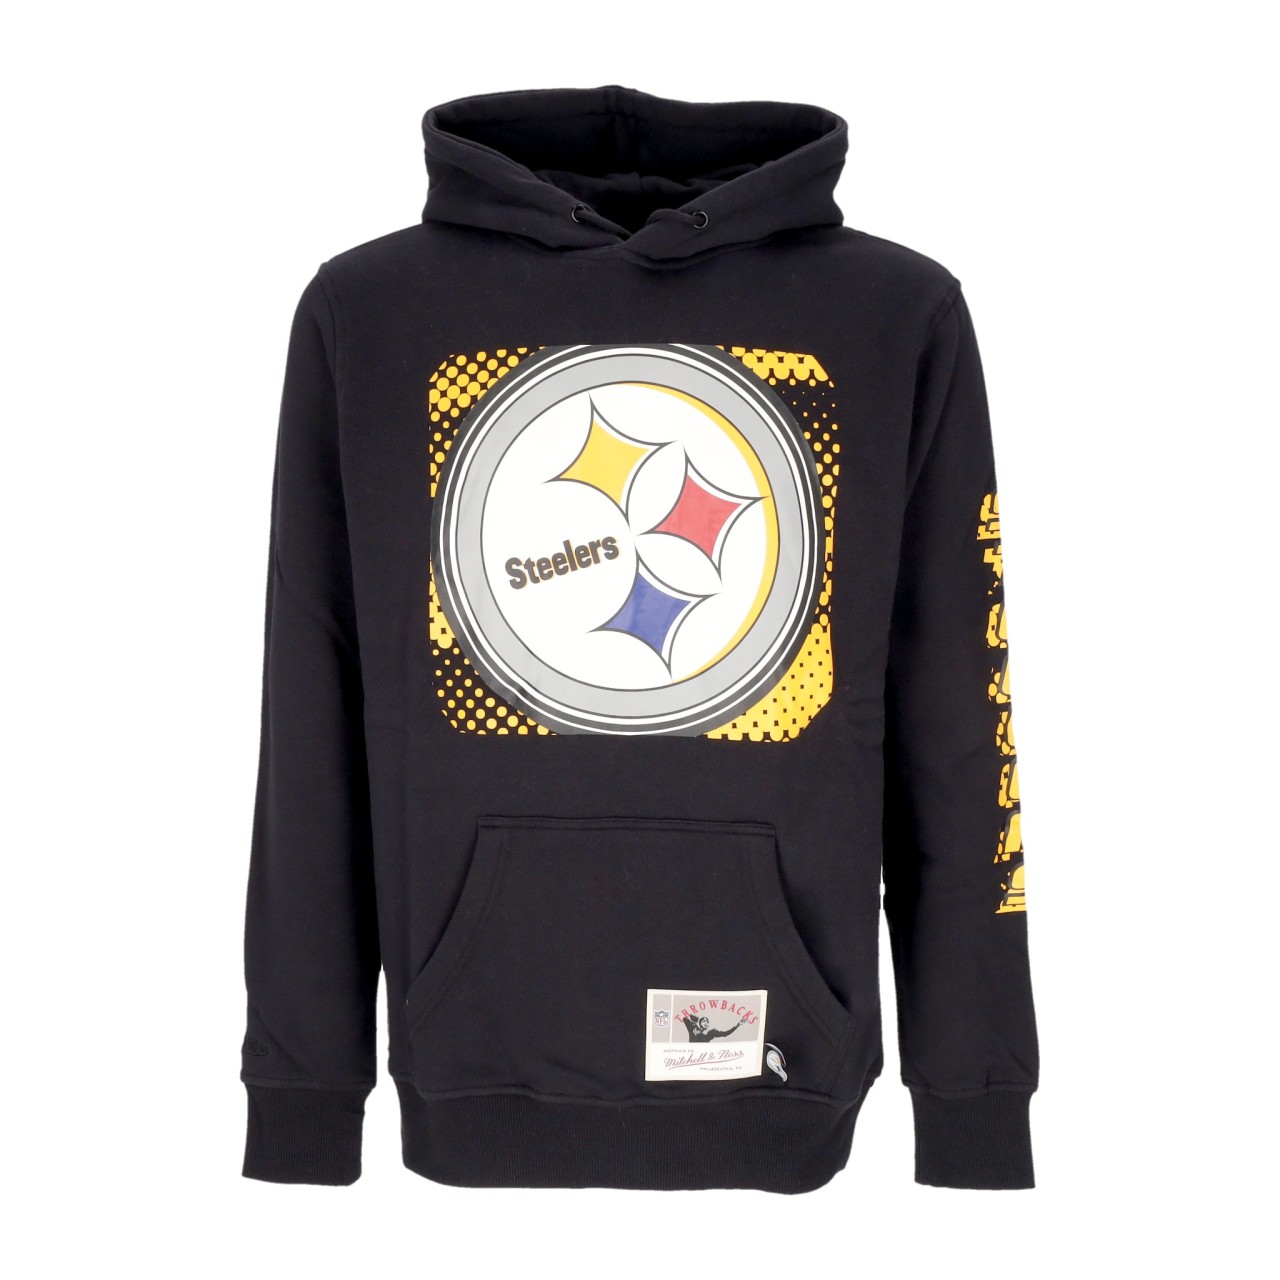 MITCHELL & NESS NFL BIG FACE 7.0 HOODIE PITSTE FPHD5901-PSTYYPPPBLCK